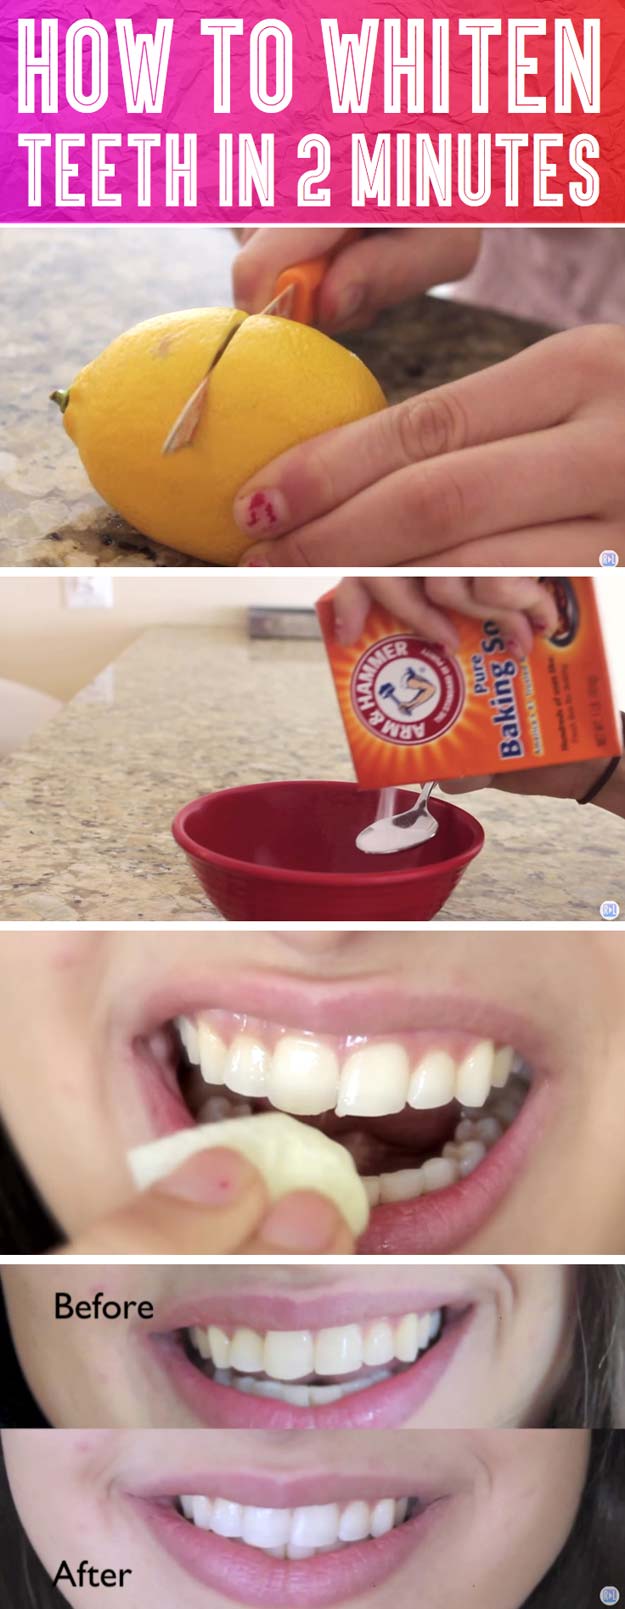 Best Beauty Hacks - Whiten Teeth In 2 Minutes - Easy Makeup Tutorials and Makeup Ideas for Teens, Beginners, Women, Teenagers - Cool Tips and Tricks for Mascara, Lipstick, Foundation, Hair, Blush, Eyeshadow, Eyebrows and Eyes - Step by Step Tutorials and How To #beautyhacks #beautyideas #makeuptutorial #makeuphakcs #makeup #hair #teens